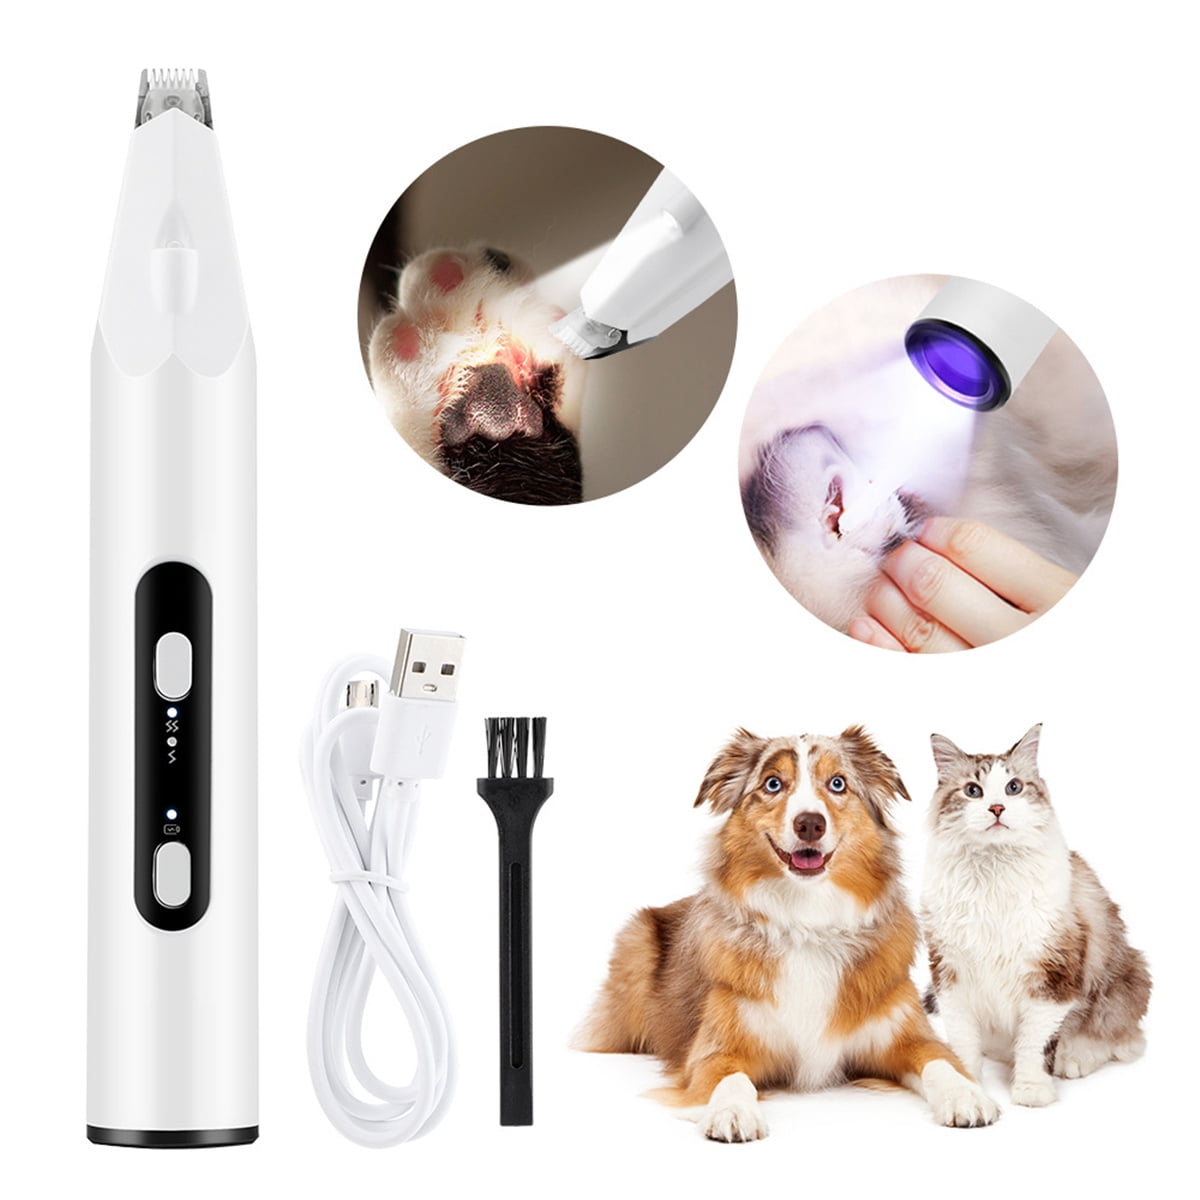 Dog Clippers - 3 in 1 Pet Groomer with LED Black Light Detector and LED  Light Cat Dog Paw Clippers Cordless Small Pet Hair Trimmer for Trimming  Hair Around Paws, Eyes, Ears,